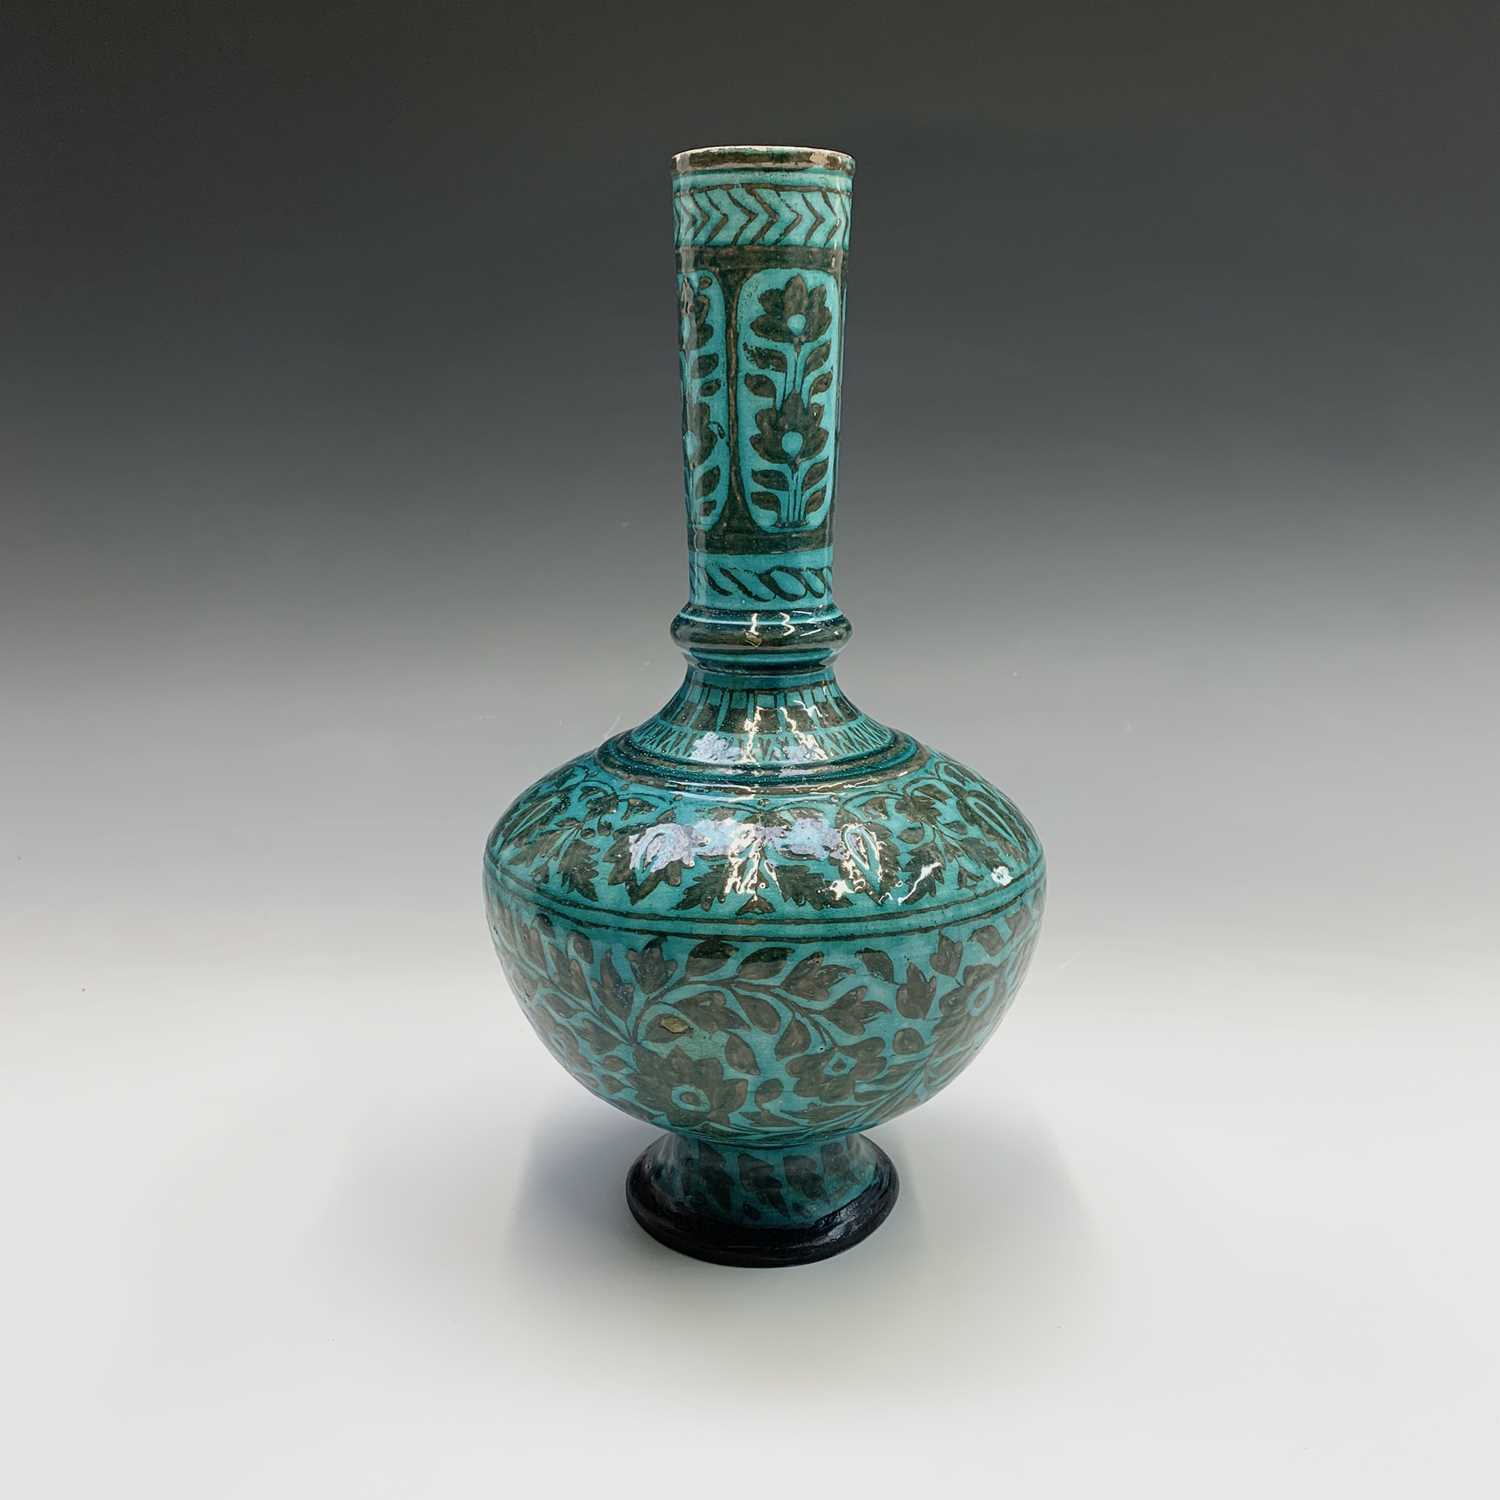 A Persian pottery bottle vase, the turquoise ground with scrolling leafy vines and flowerheads,